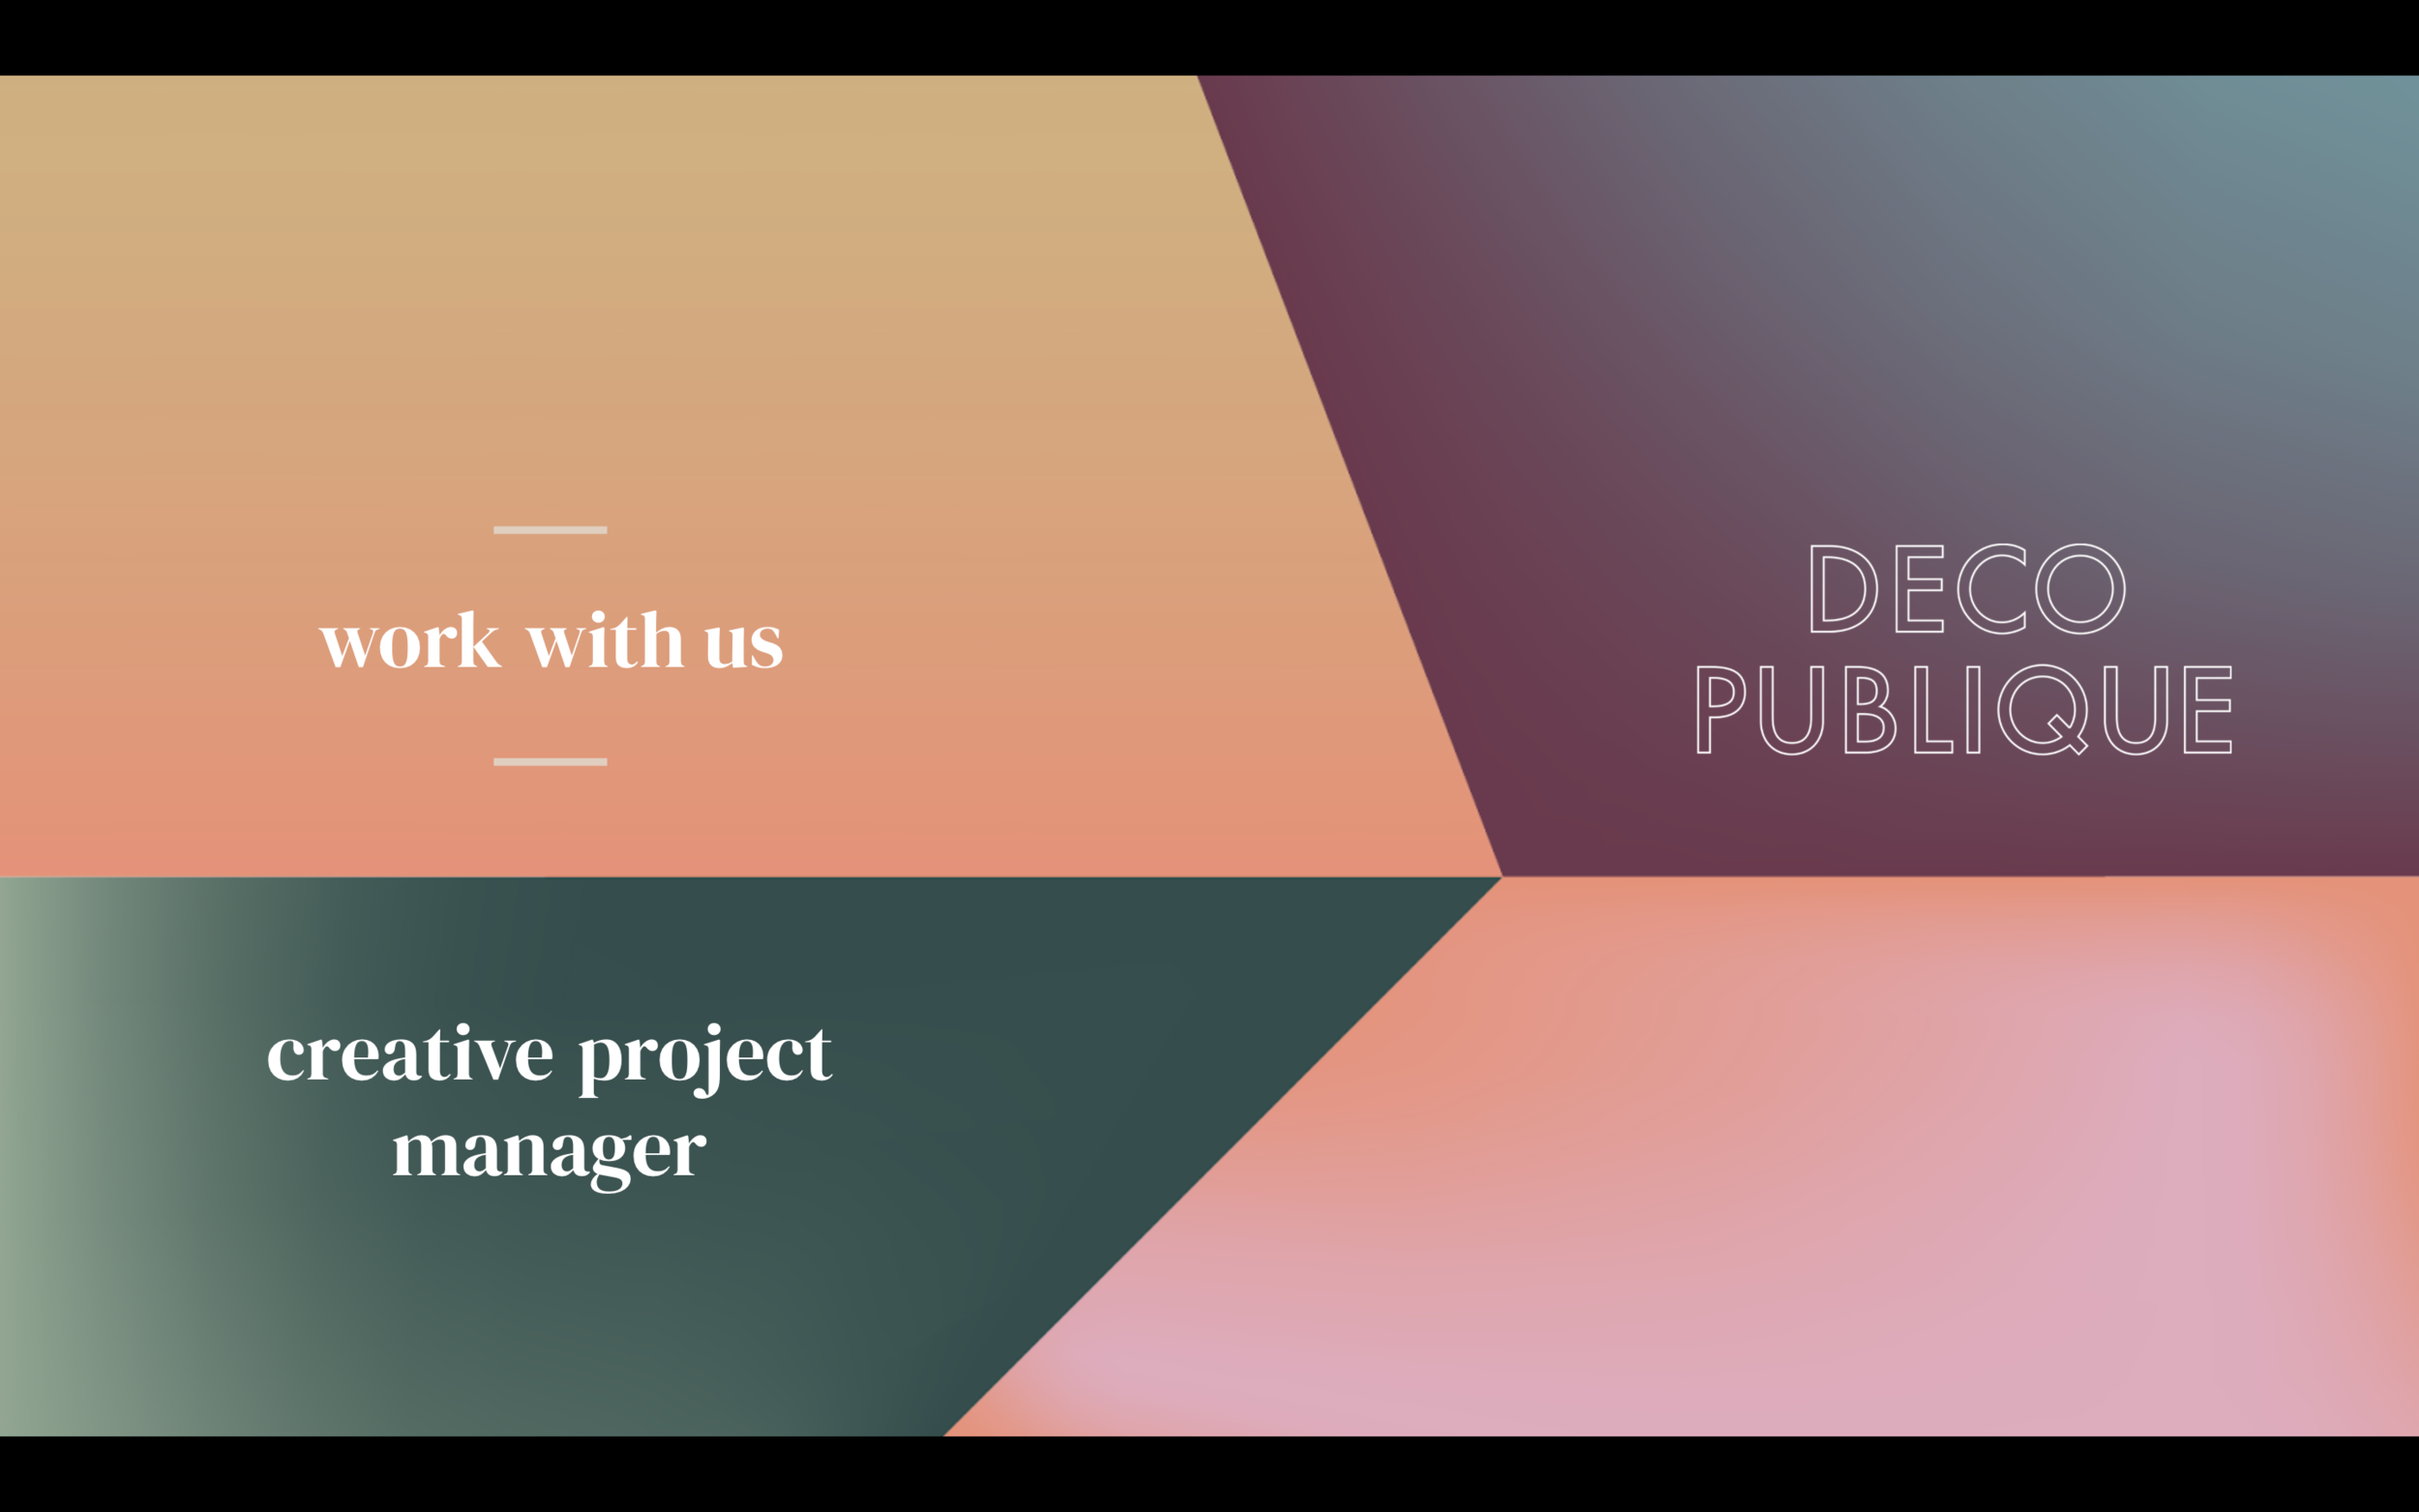 Creative Project Manager